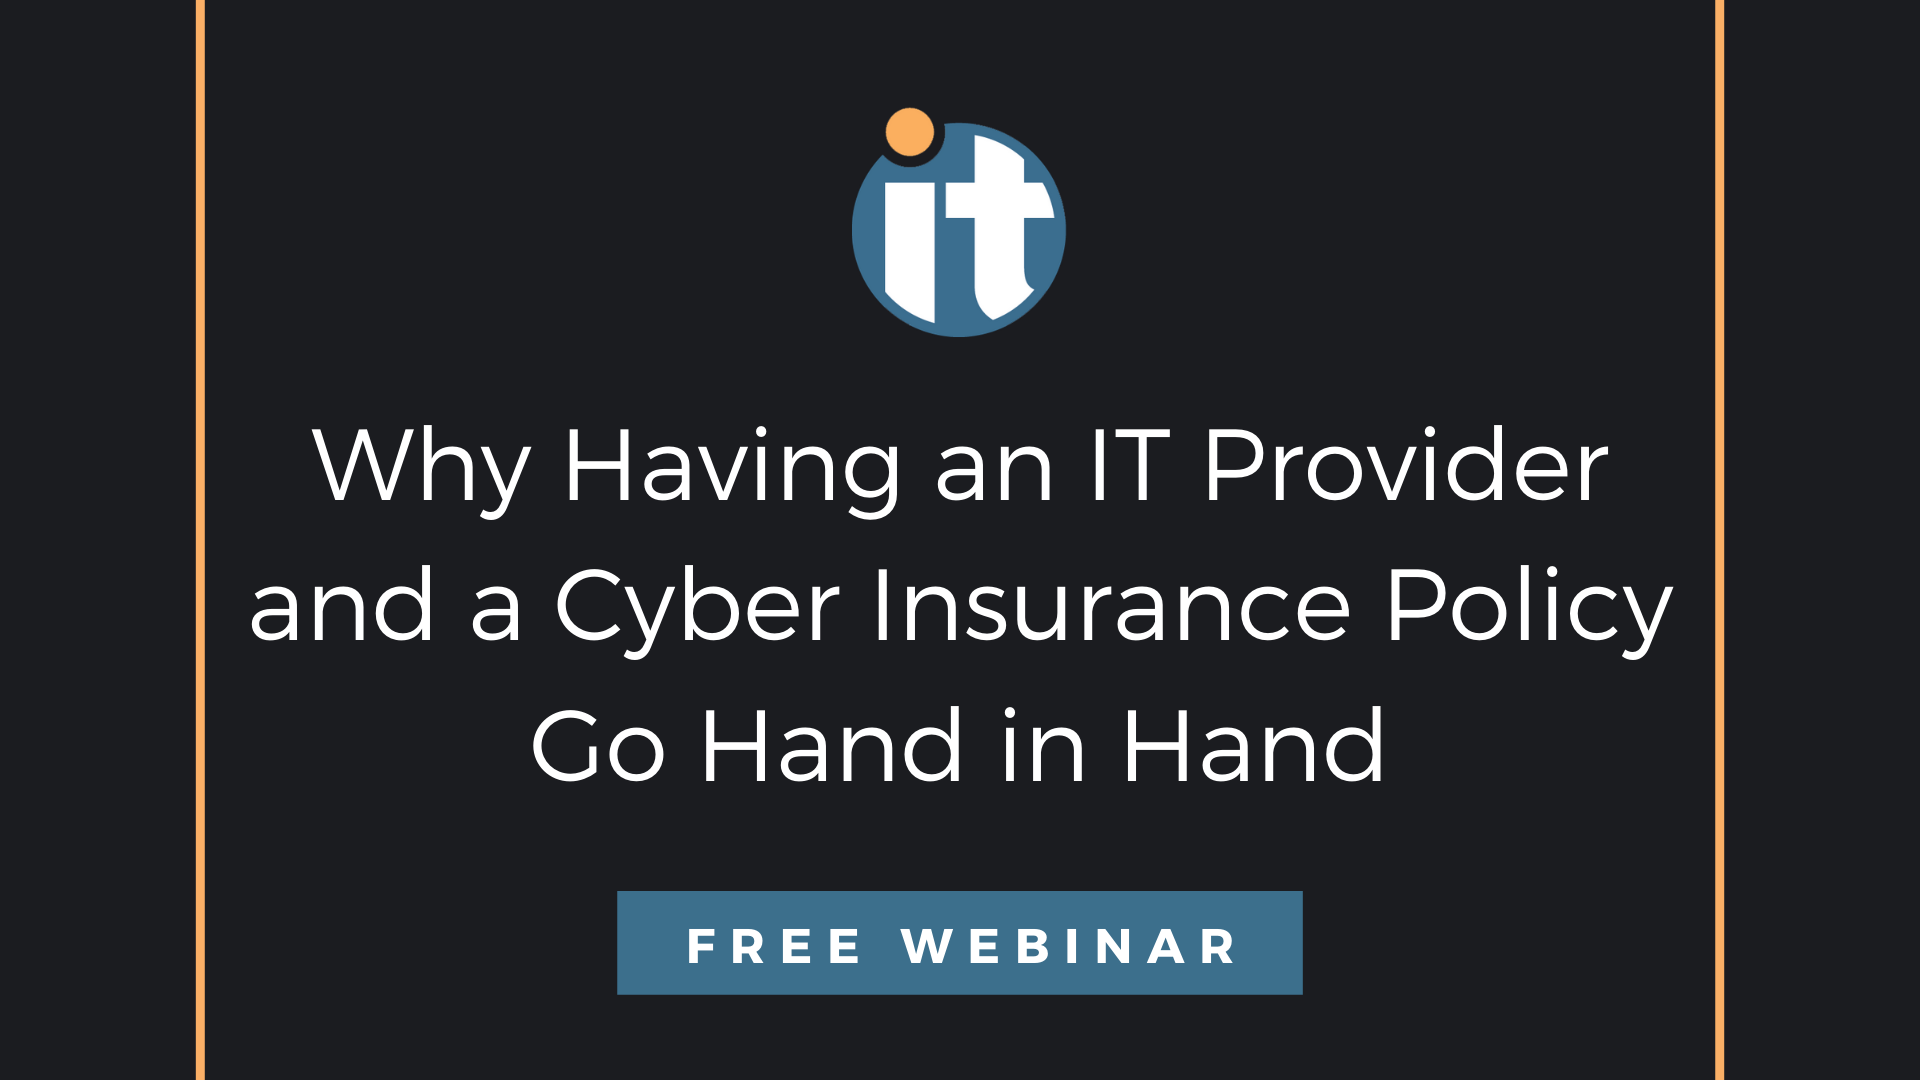 Why Having an IT Provider and a Cyber Insurance Policy Go Hand in Hand